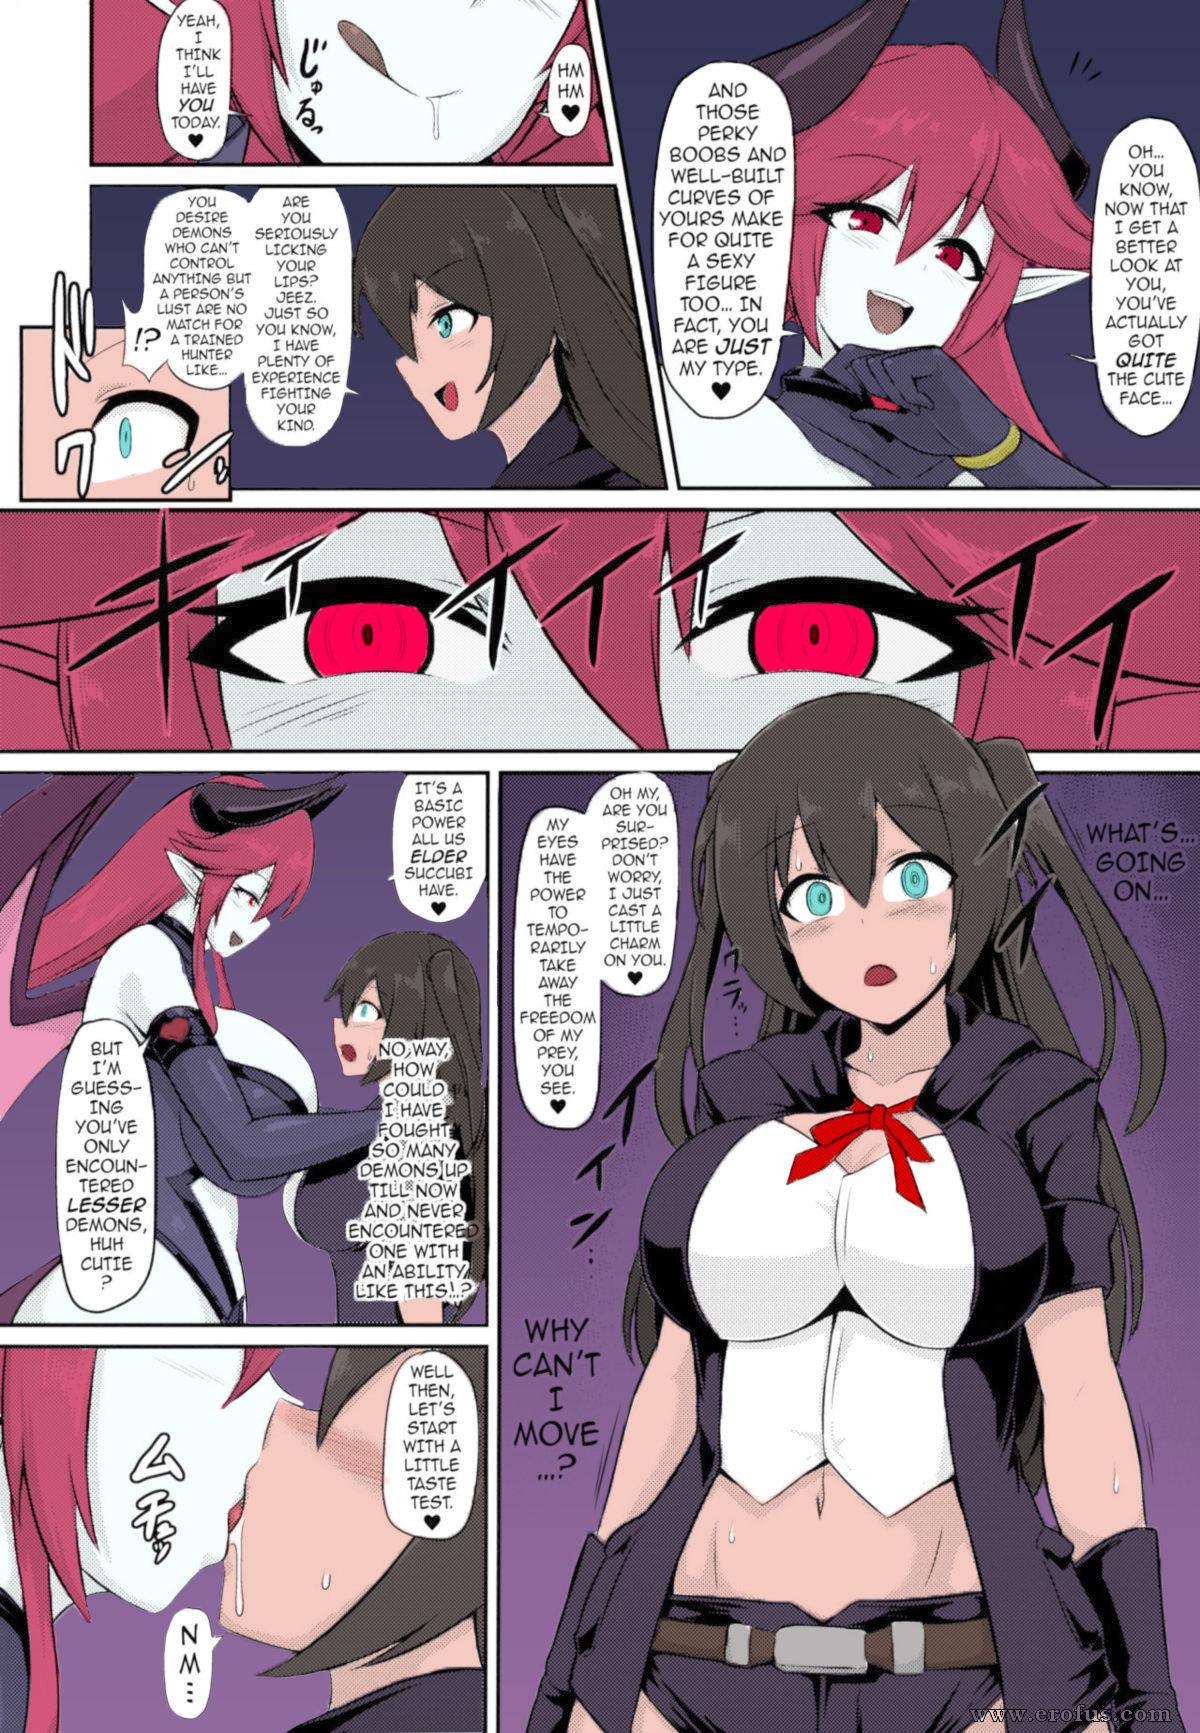 Comendo A Lesbian Succubu´s Lust Crest Pleasure Training - COLOR- Ongoing Babe - Page 3